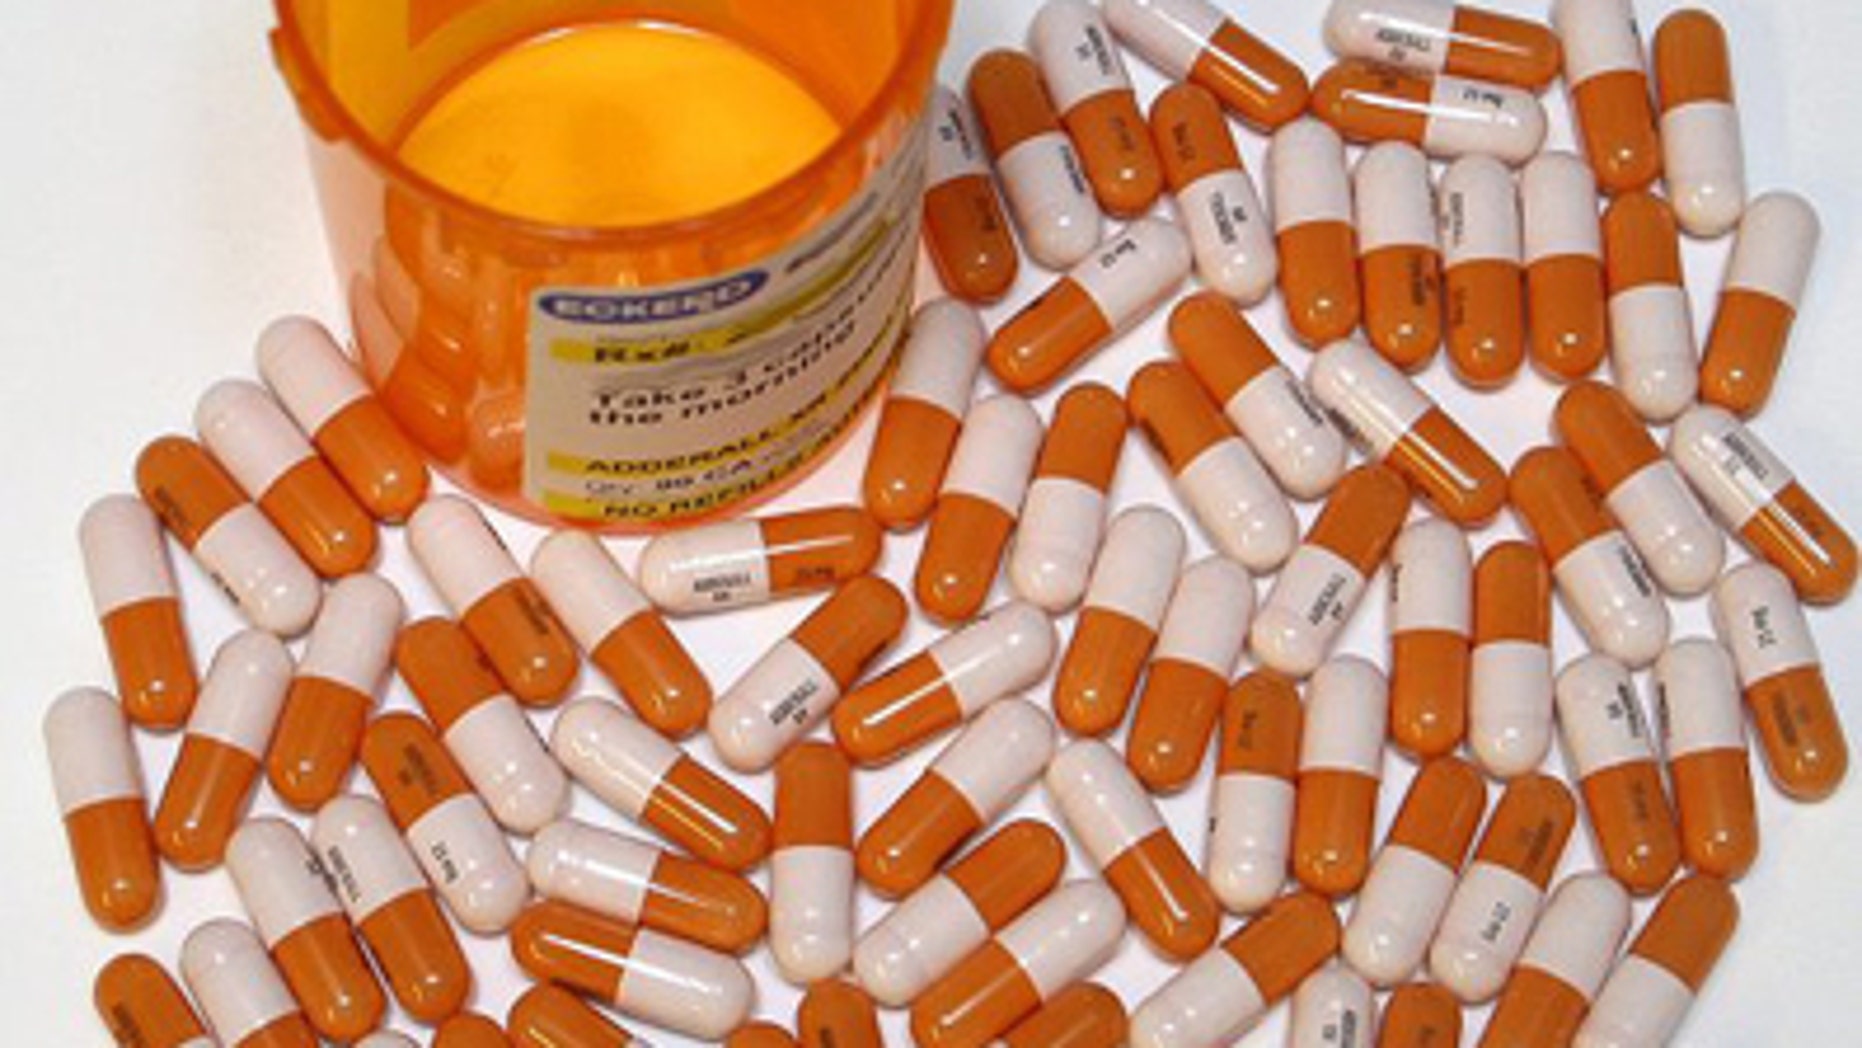 Ritalin, Adderall Shortages Leave ADHD Patients Hunting for Options Fox News